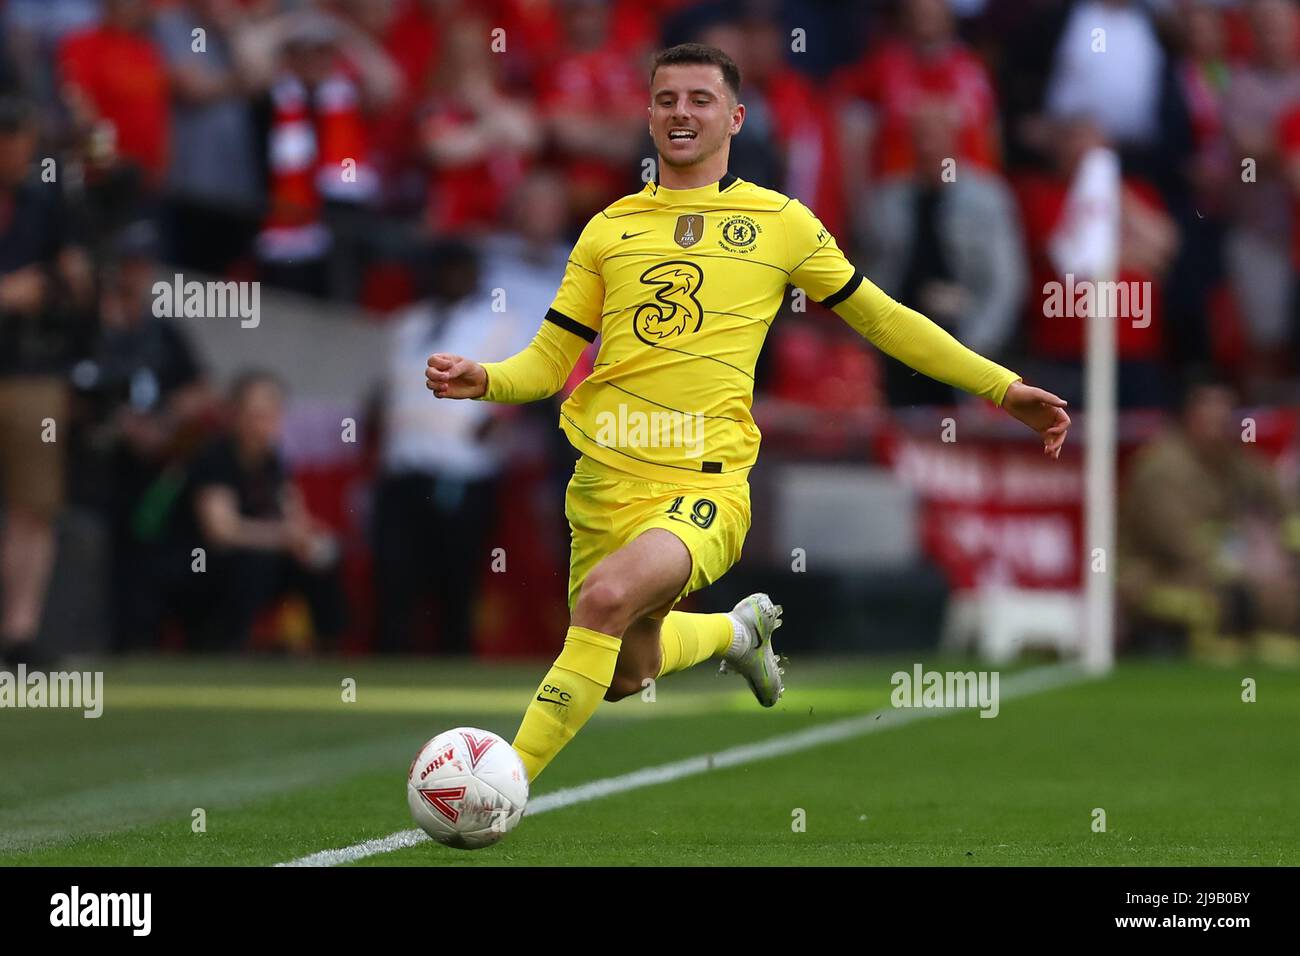 Mason Mount of Chelsea - Chelsea v Liverpool, The Emirates FA Cup Final, Wembley Stadium, London - 14th May 2022  Editorial Use Only Stock Photo